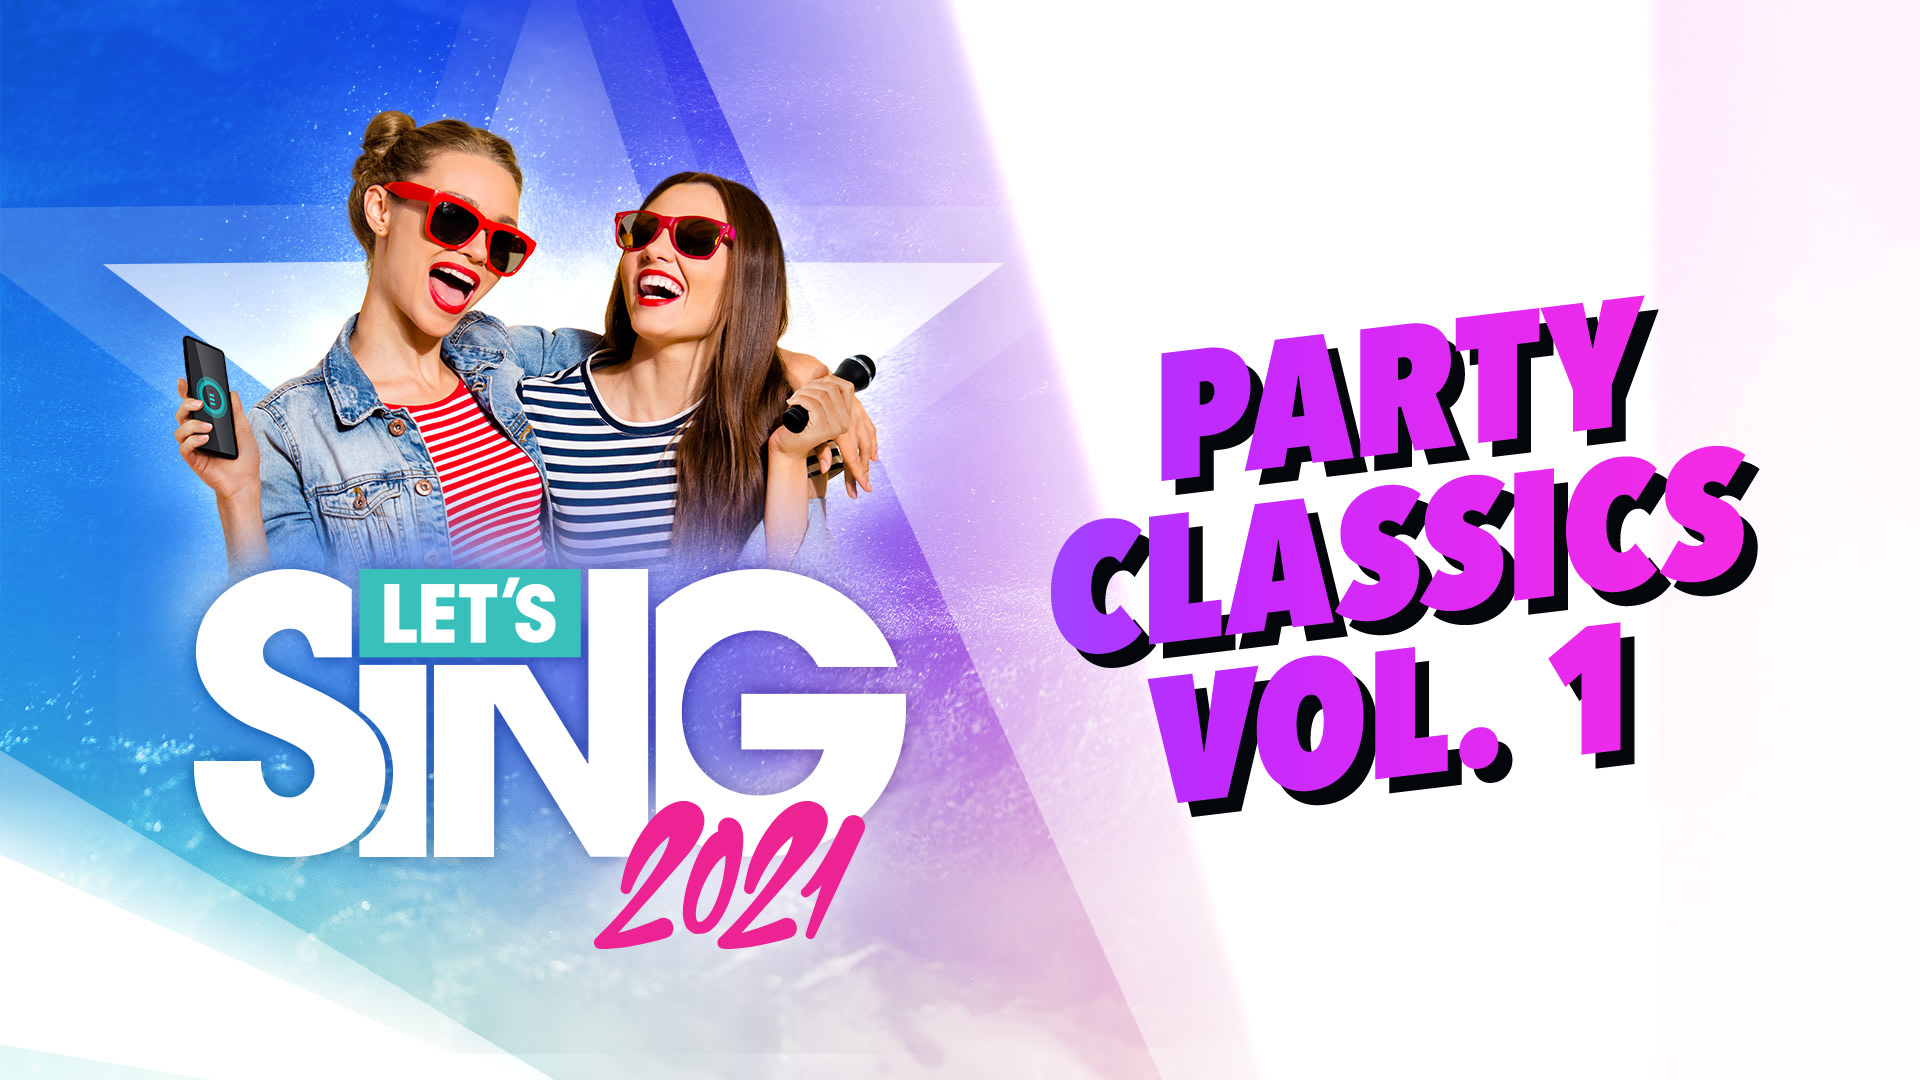 Let's Sing 2021 - Party Classics Vol. 1  Song Pack